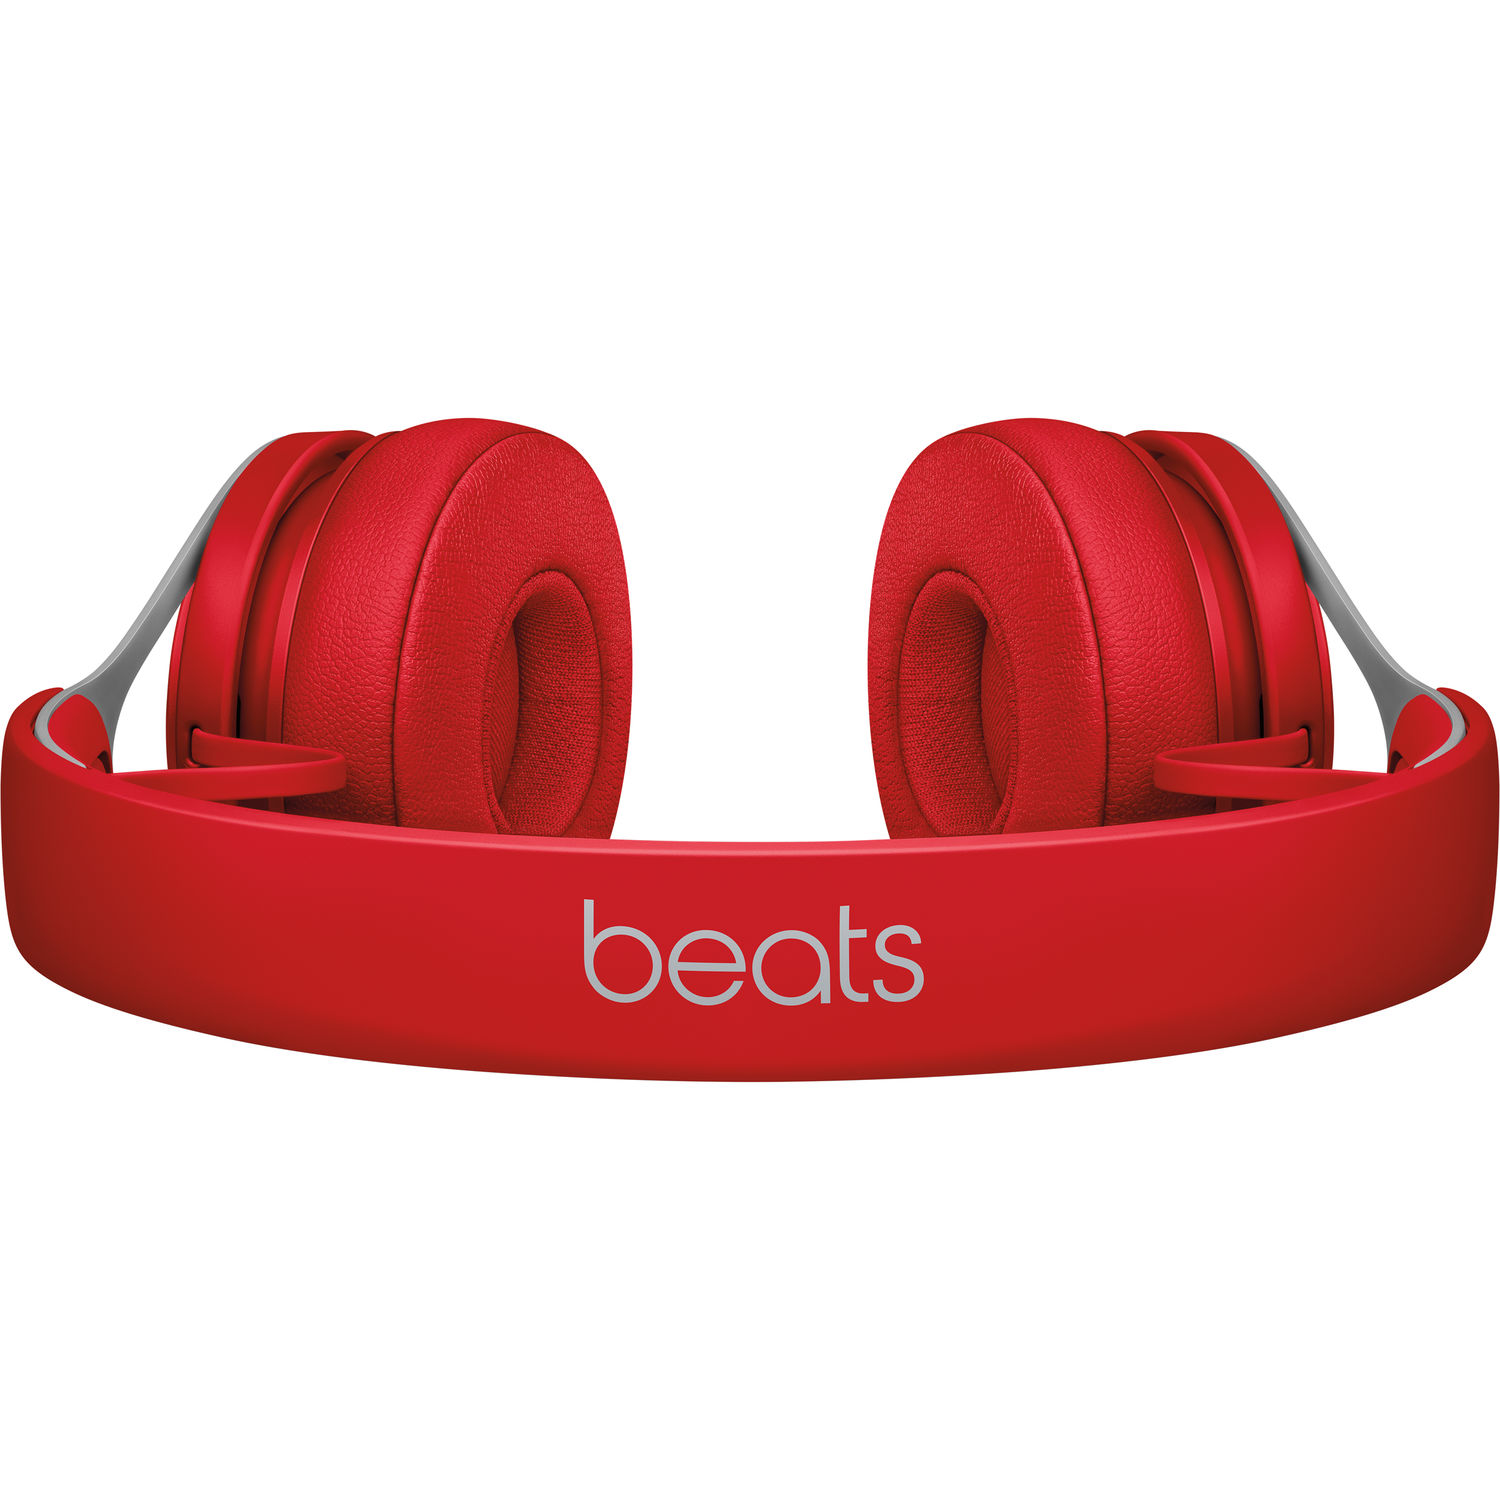 Beats EP Wired On-Ear Headphones (ML9C2ZM/A) - Battery Free for Unlimited Listening, Built in Mic and Controls - (Red) - image 4 of 6